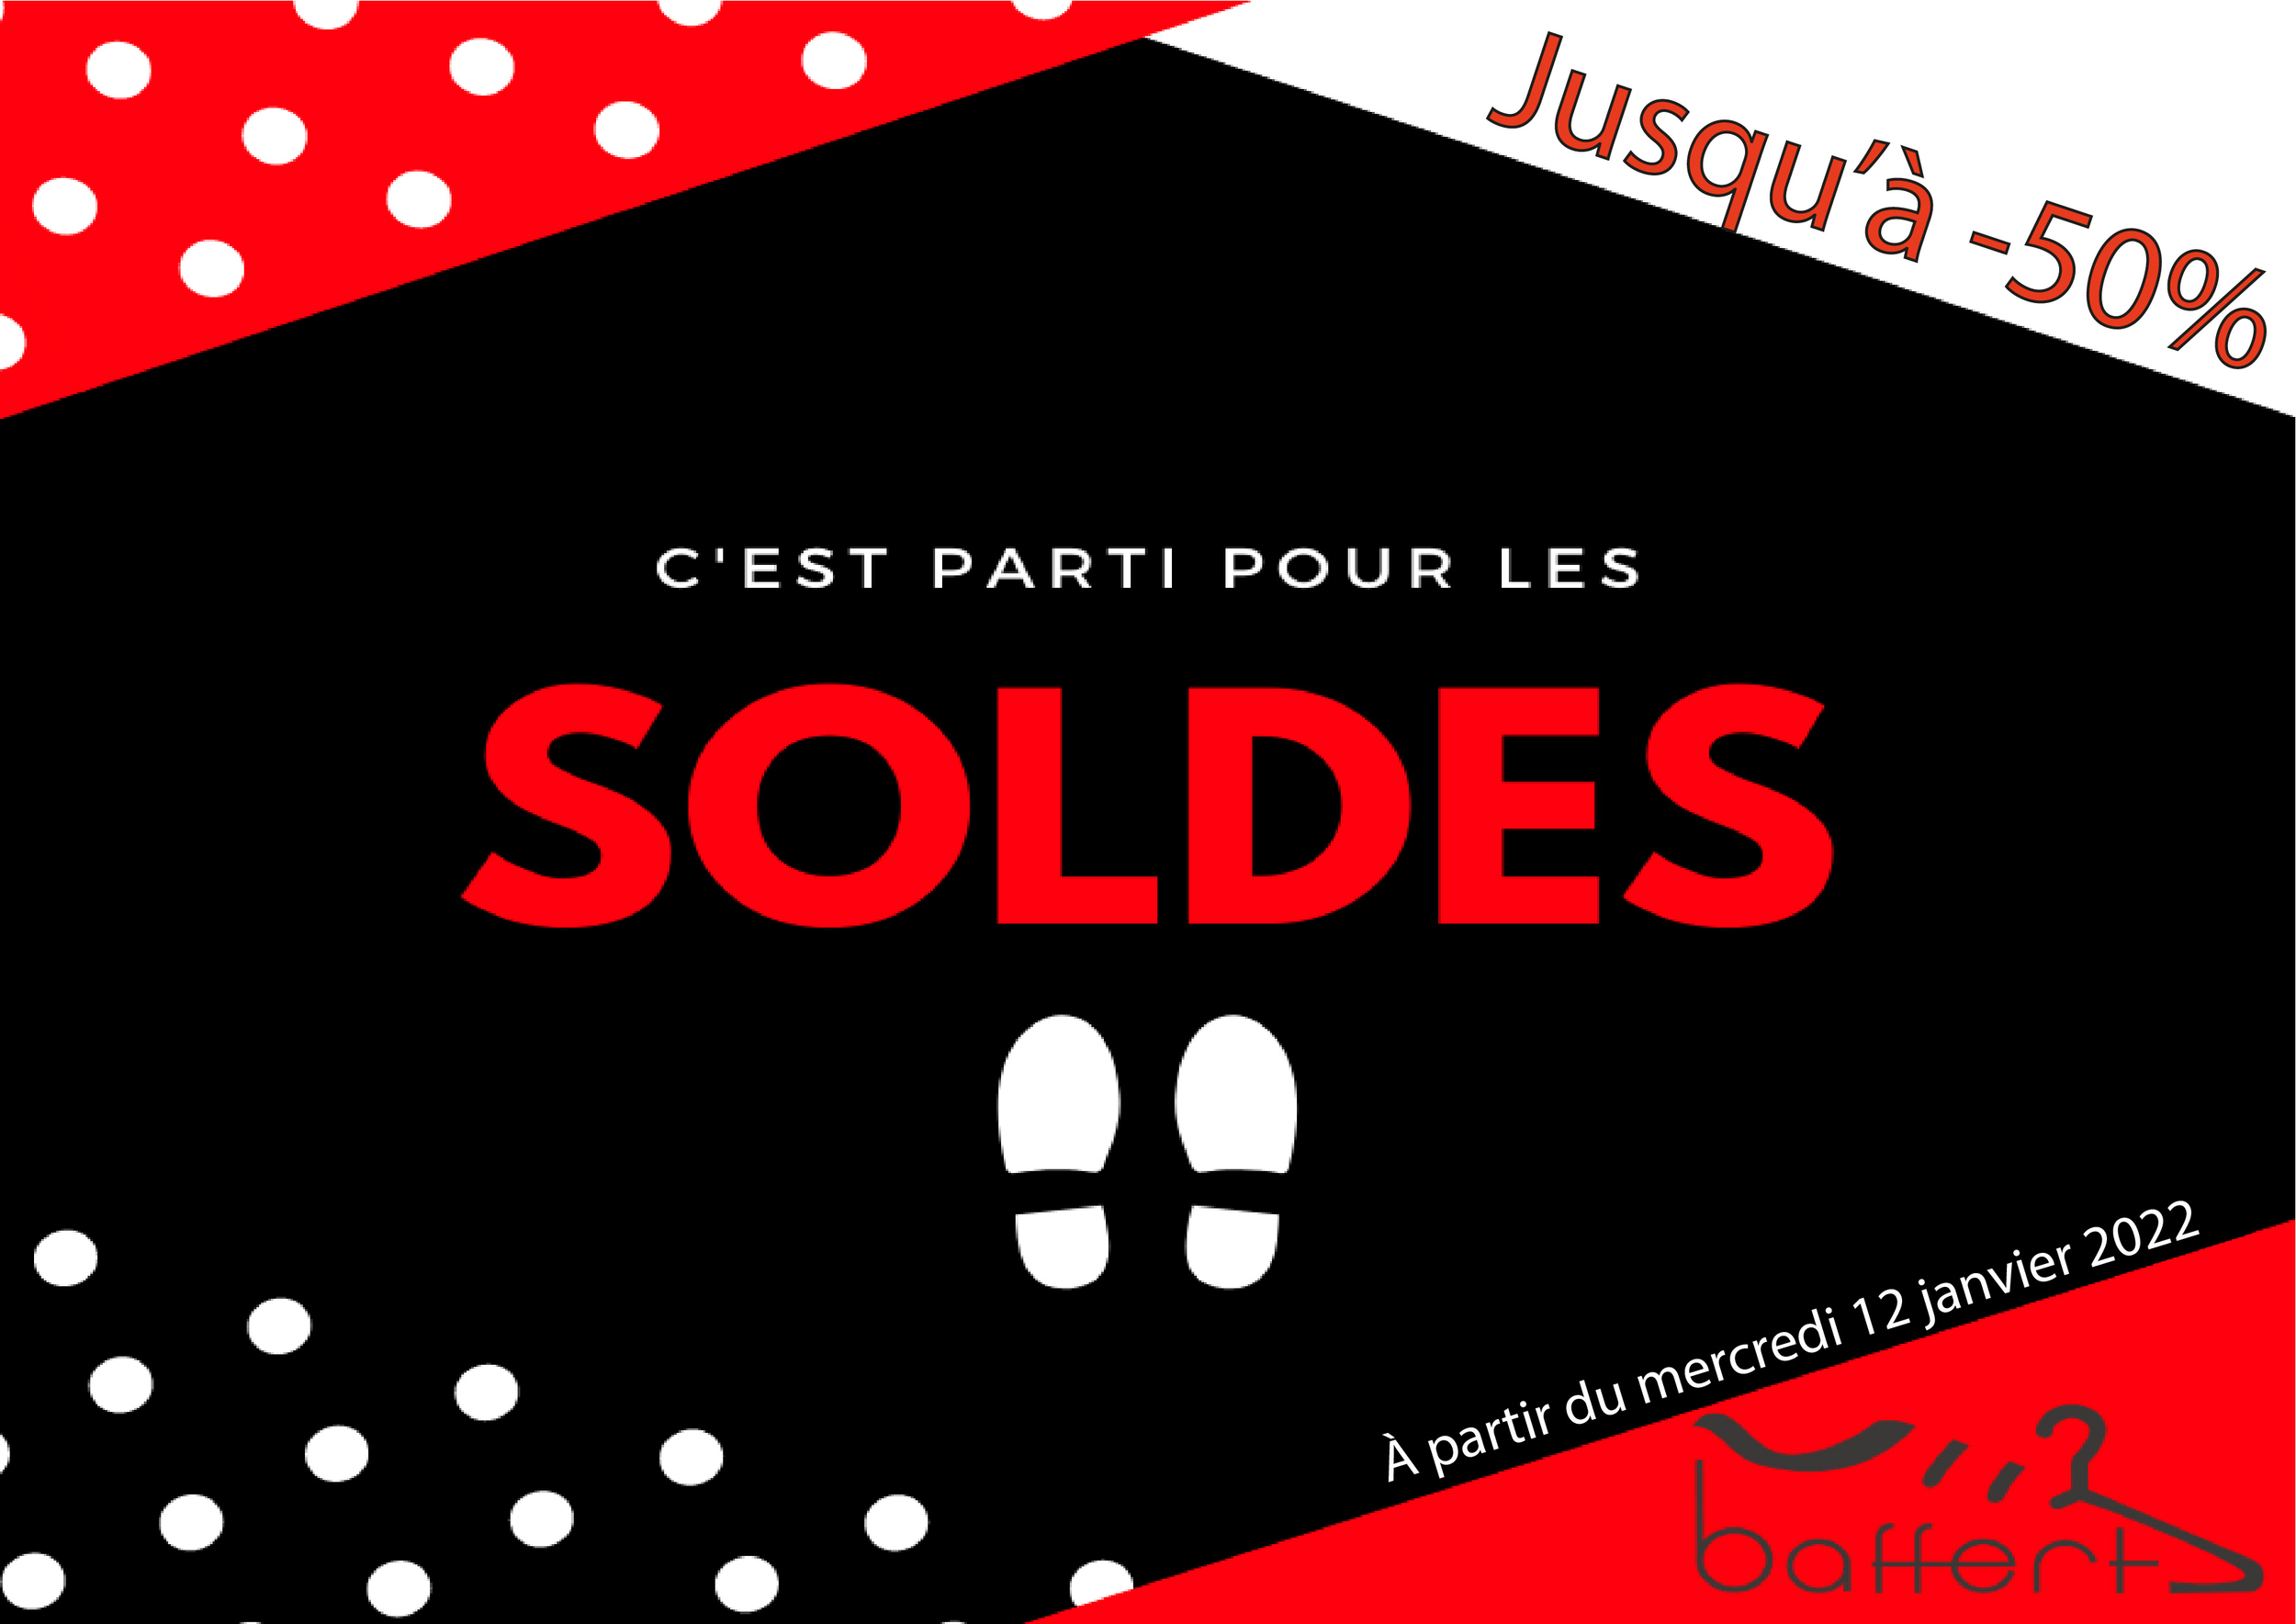 ruy soldes hiver 2022 01